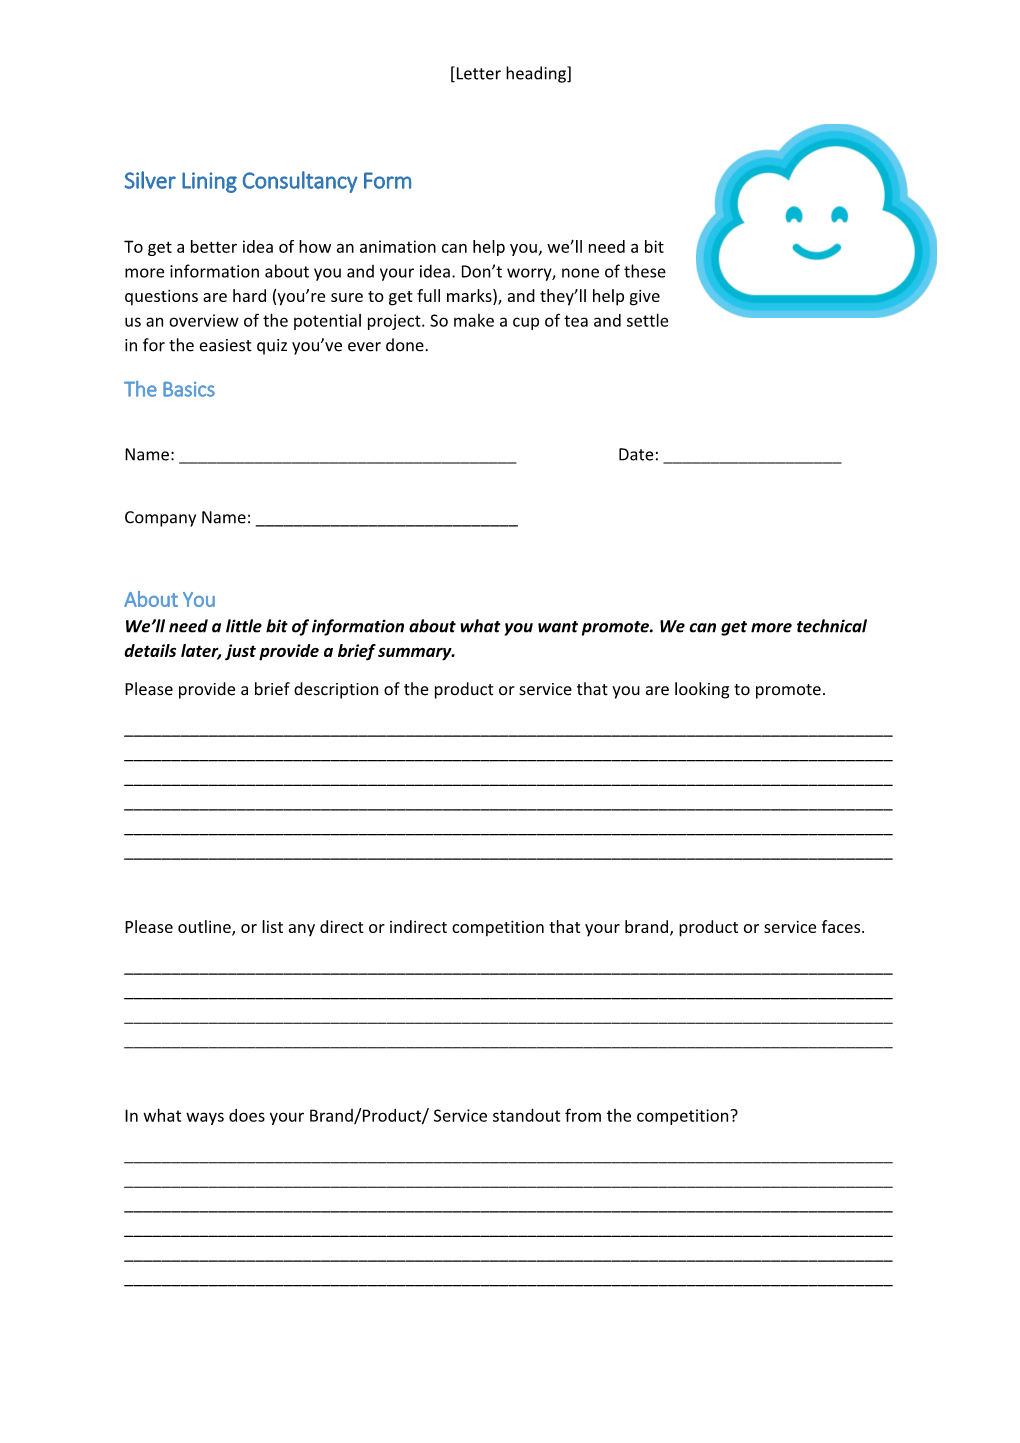 Silver Lining Consultancy Form